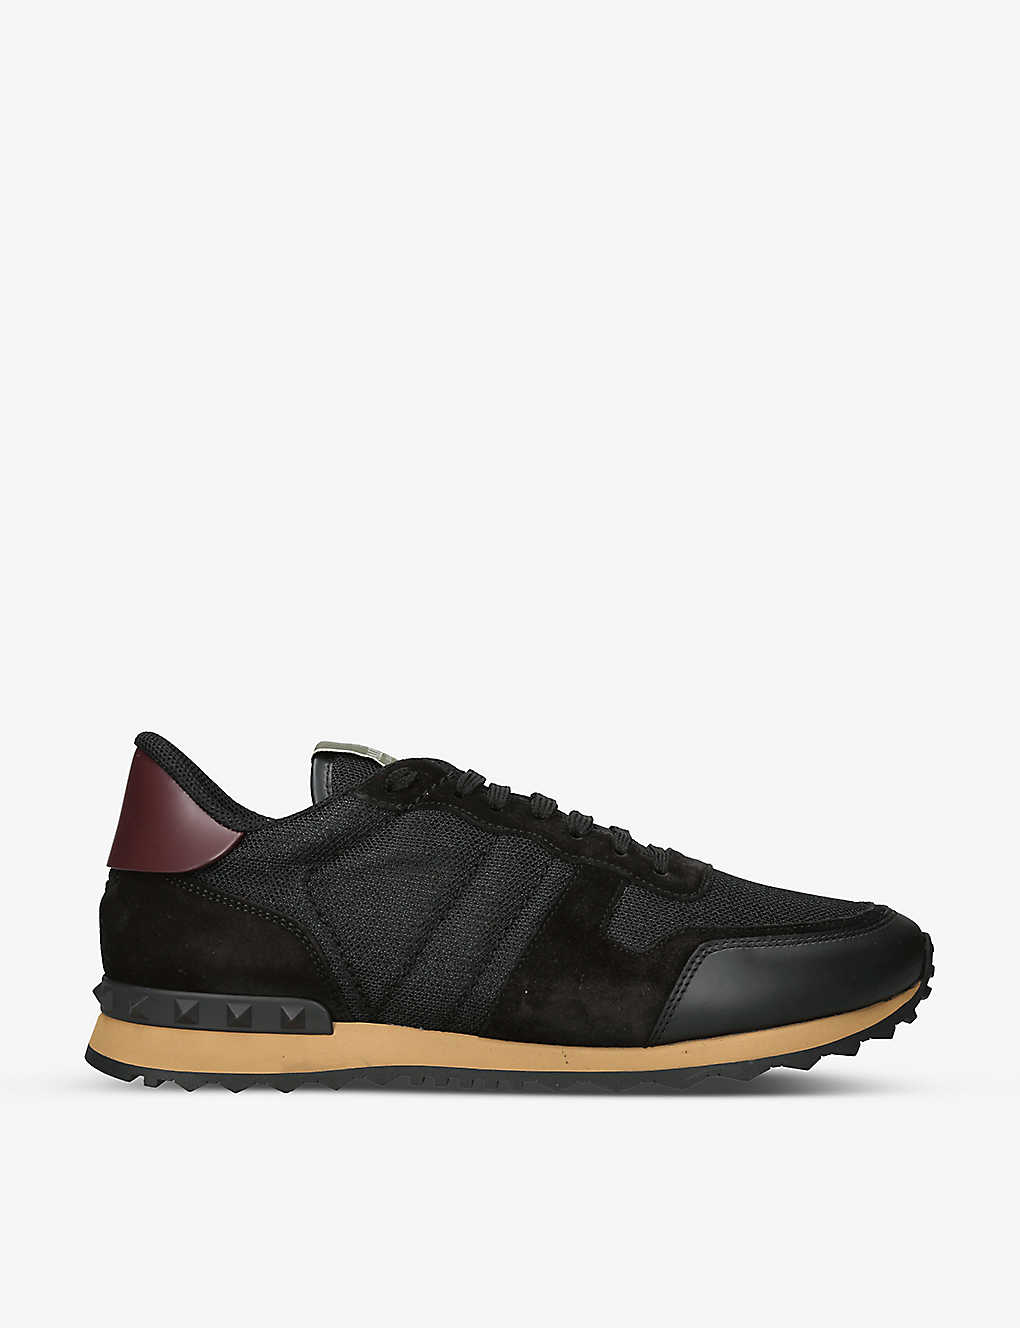 Valentino Garavani Rockrunner Leather, Suede And Mesh Low-top Trainers In Blk/other